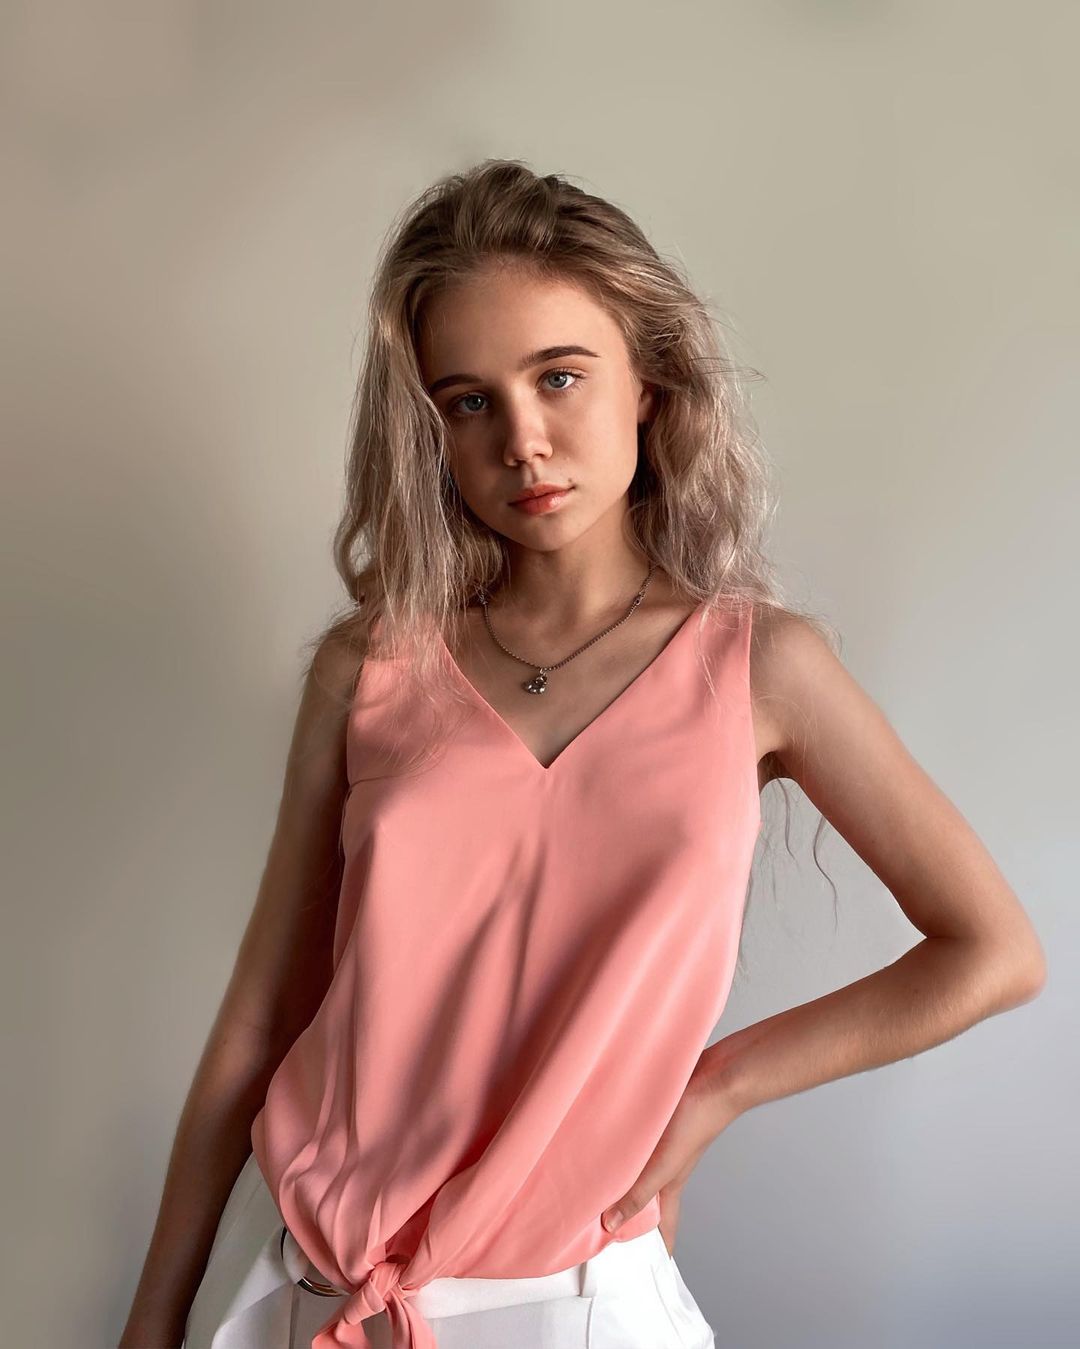 Alisa Goldfinch Photoshoot in Peach Color Top and White Bottom, January 2022 1